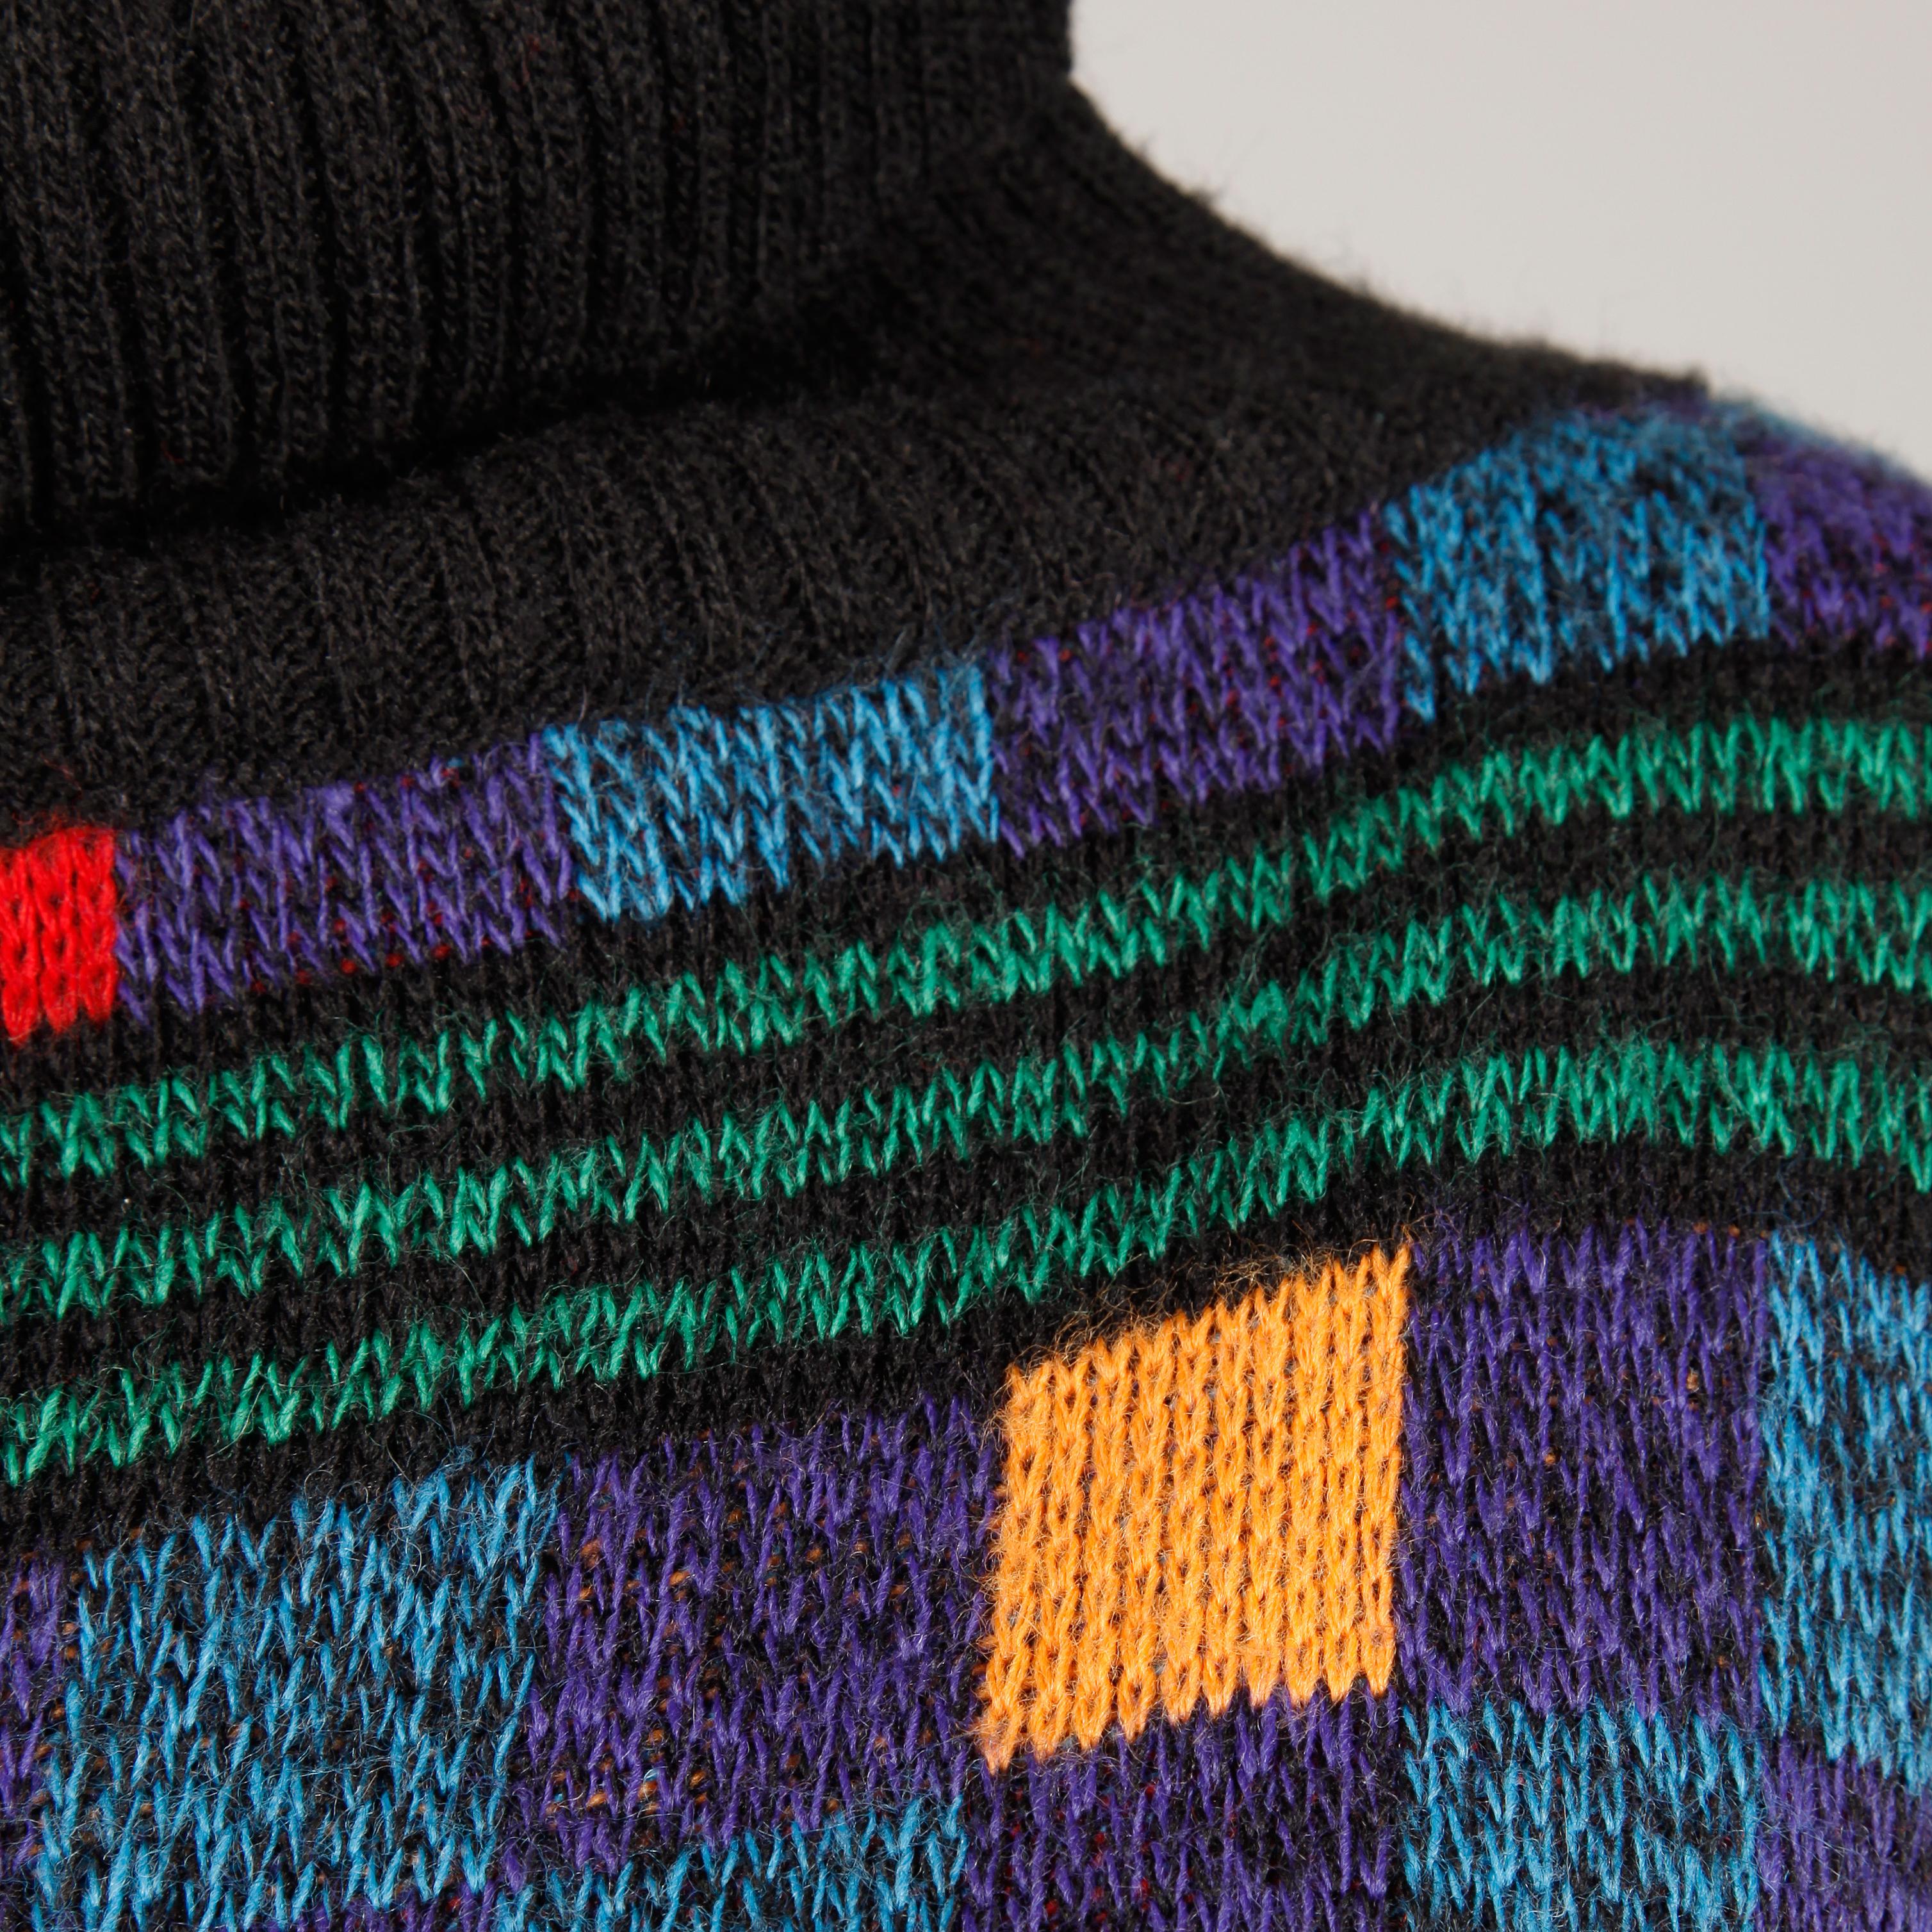 Black 1980s Kenzo Vintage Turtleneck Sweater with Colorful Checkers + Stripes